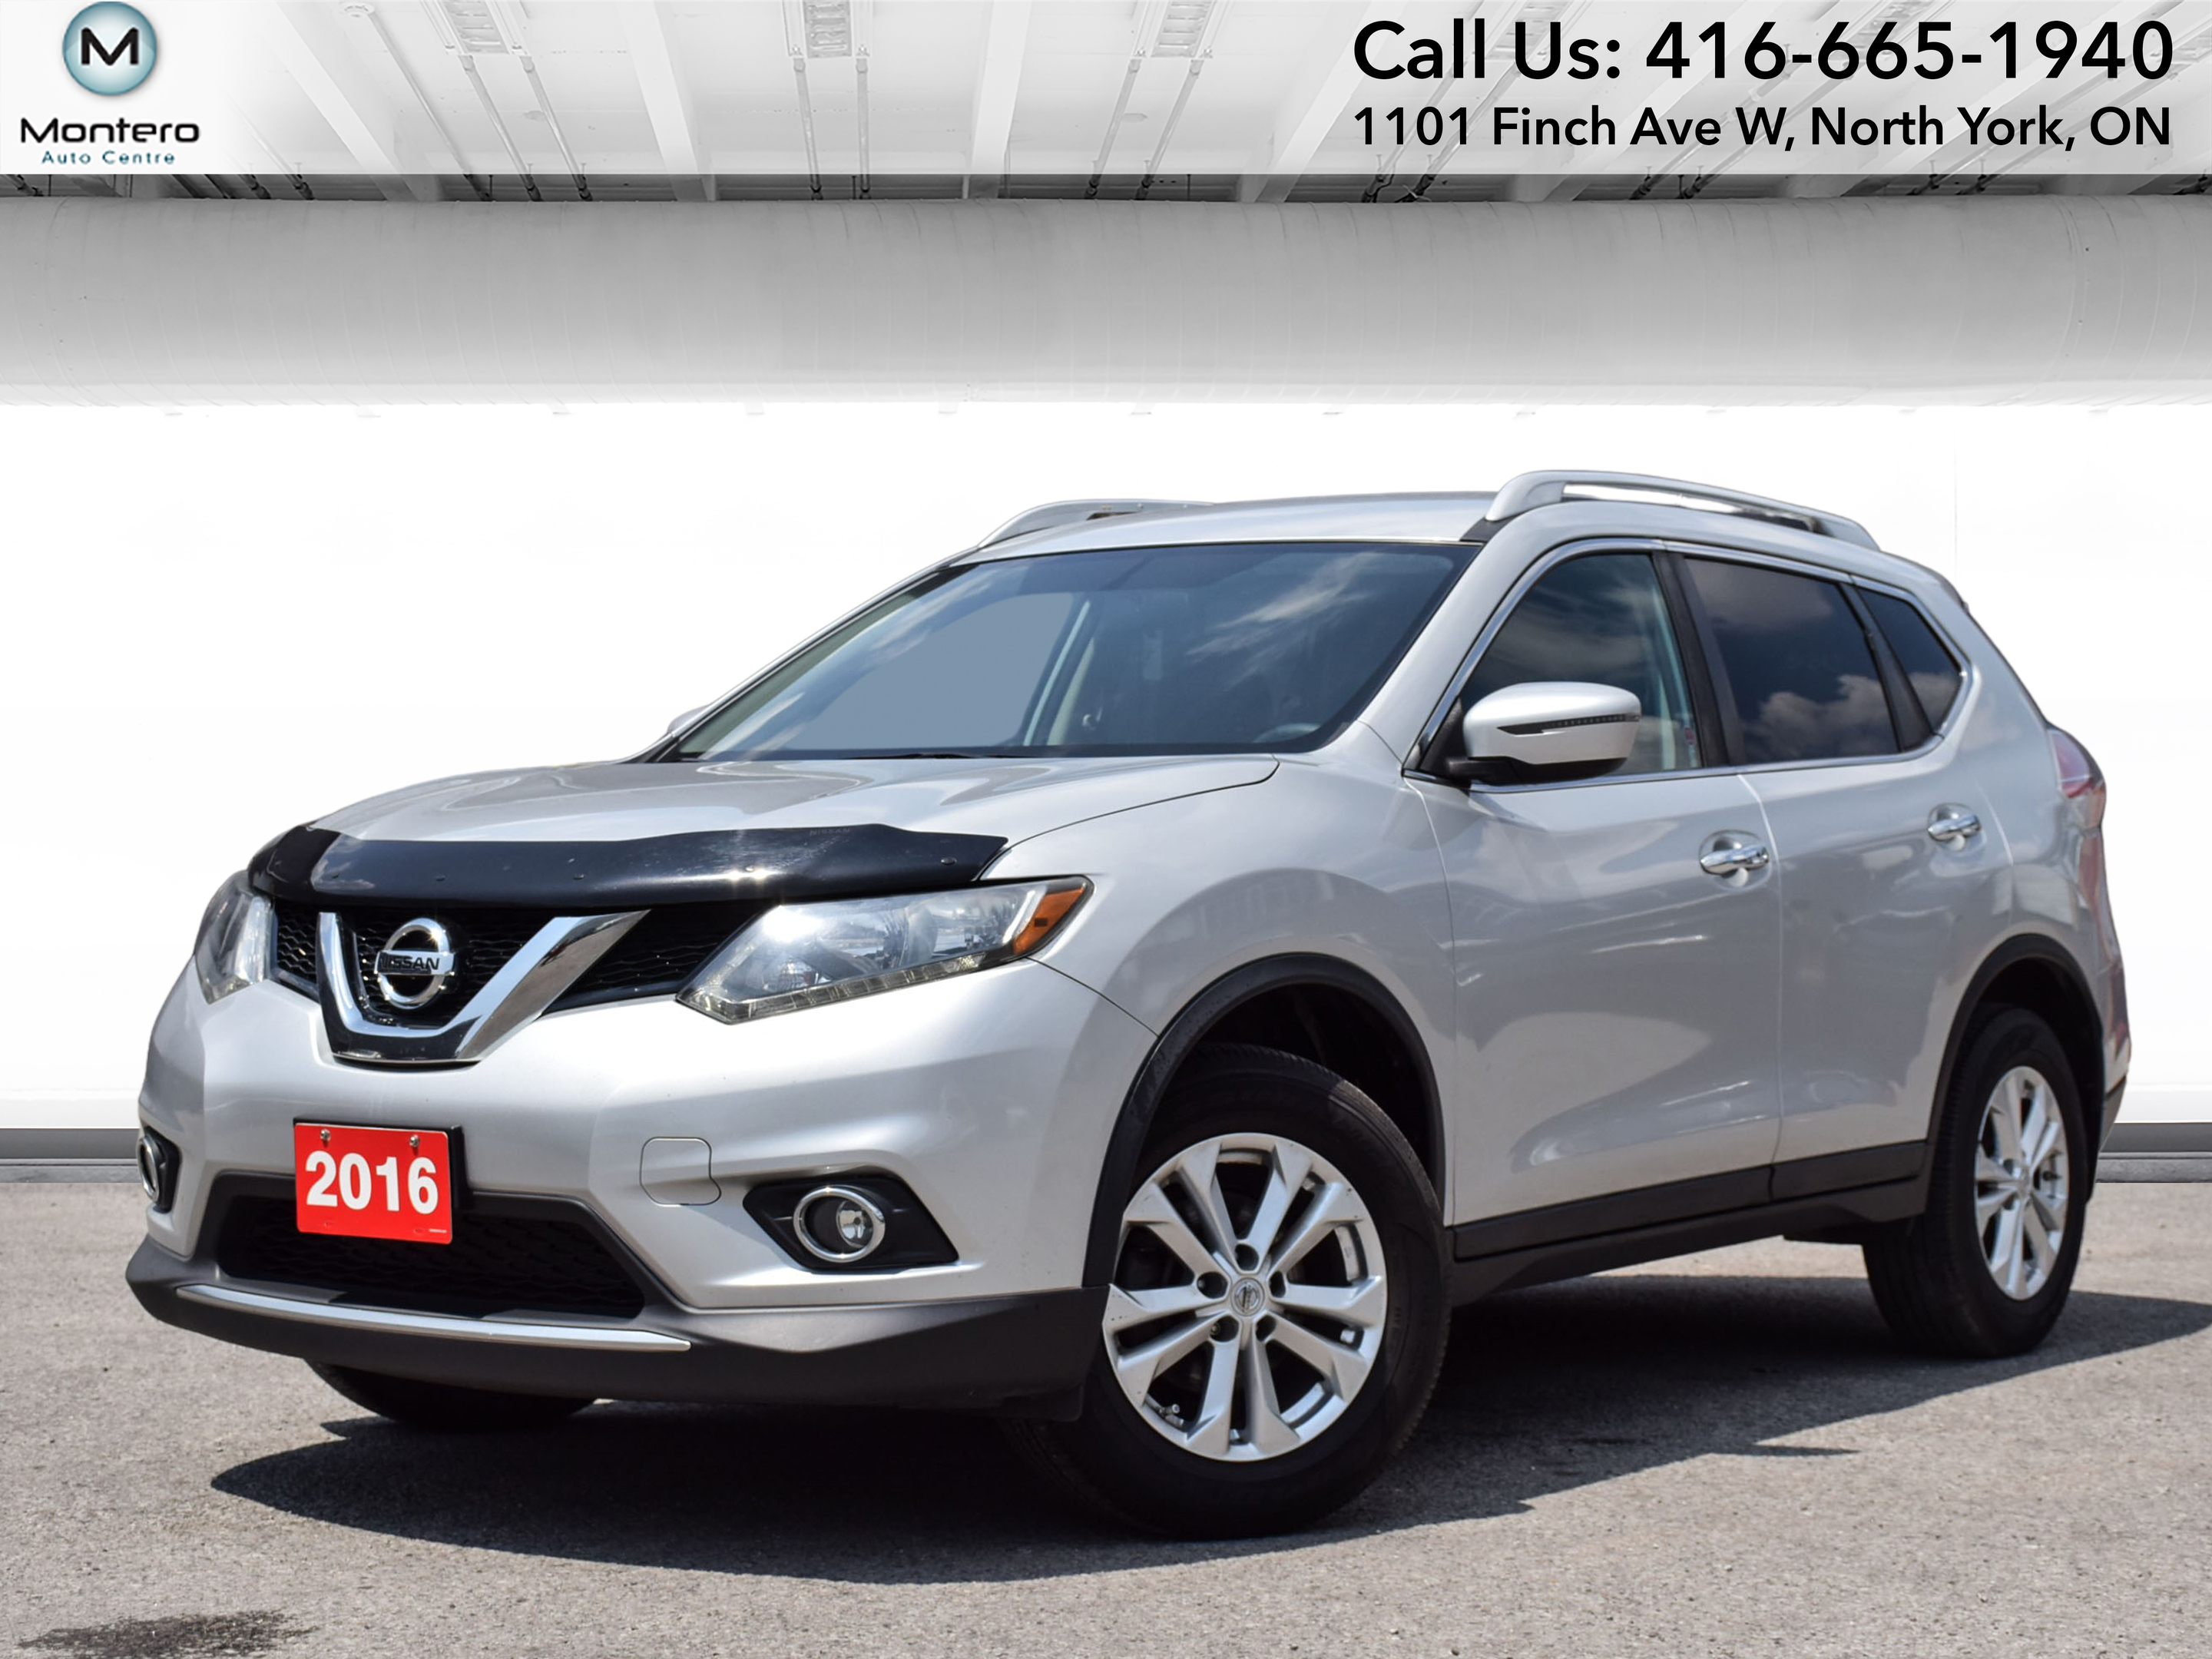 2016 Nissan Rogue ALL WHEEL DRIVE SUV BACK UP CAM SHOWROOM CONDITION